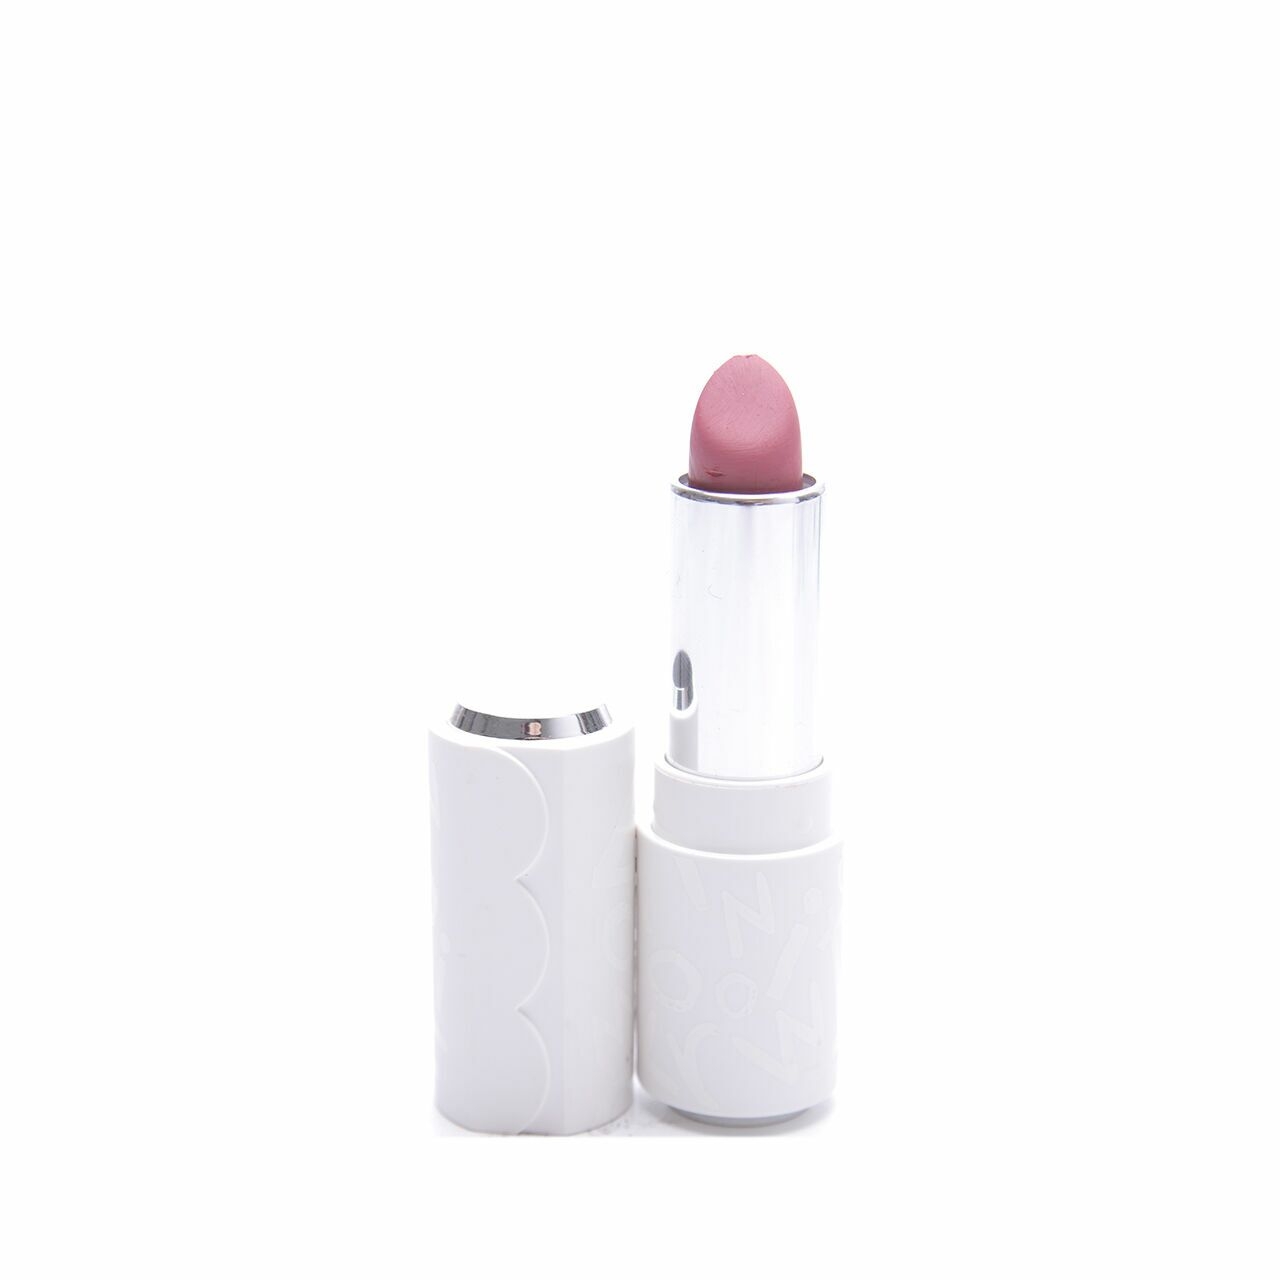 Etude House Colorful Drawing Deep Beige #BE116 Lips